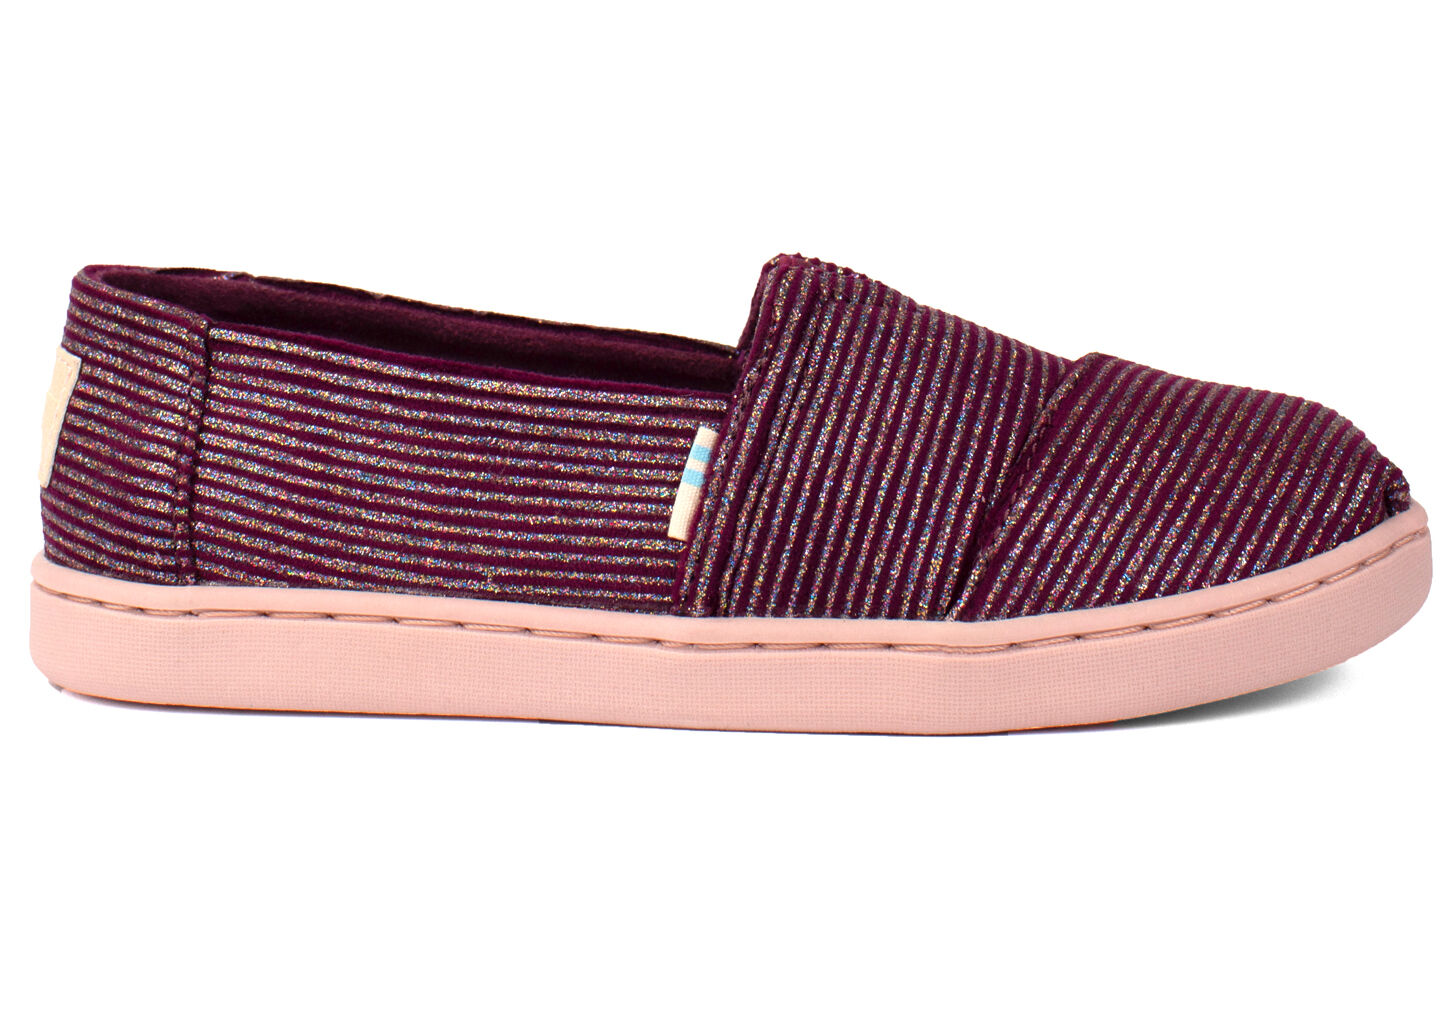 toms youth shoes